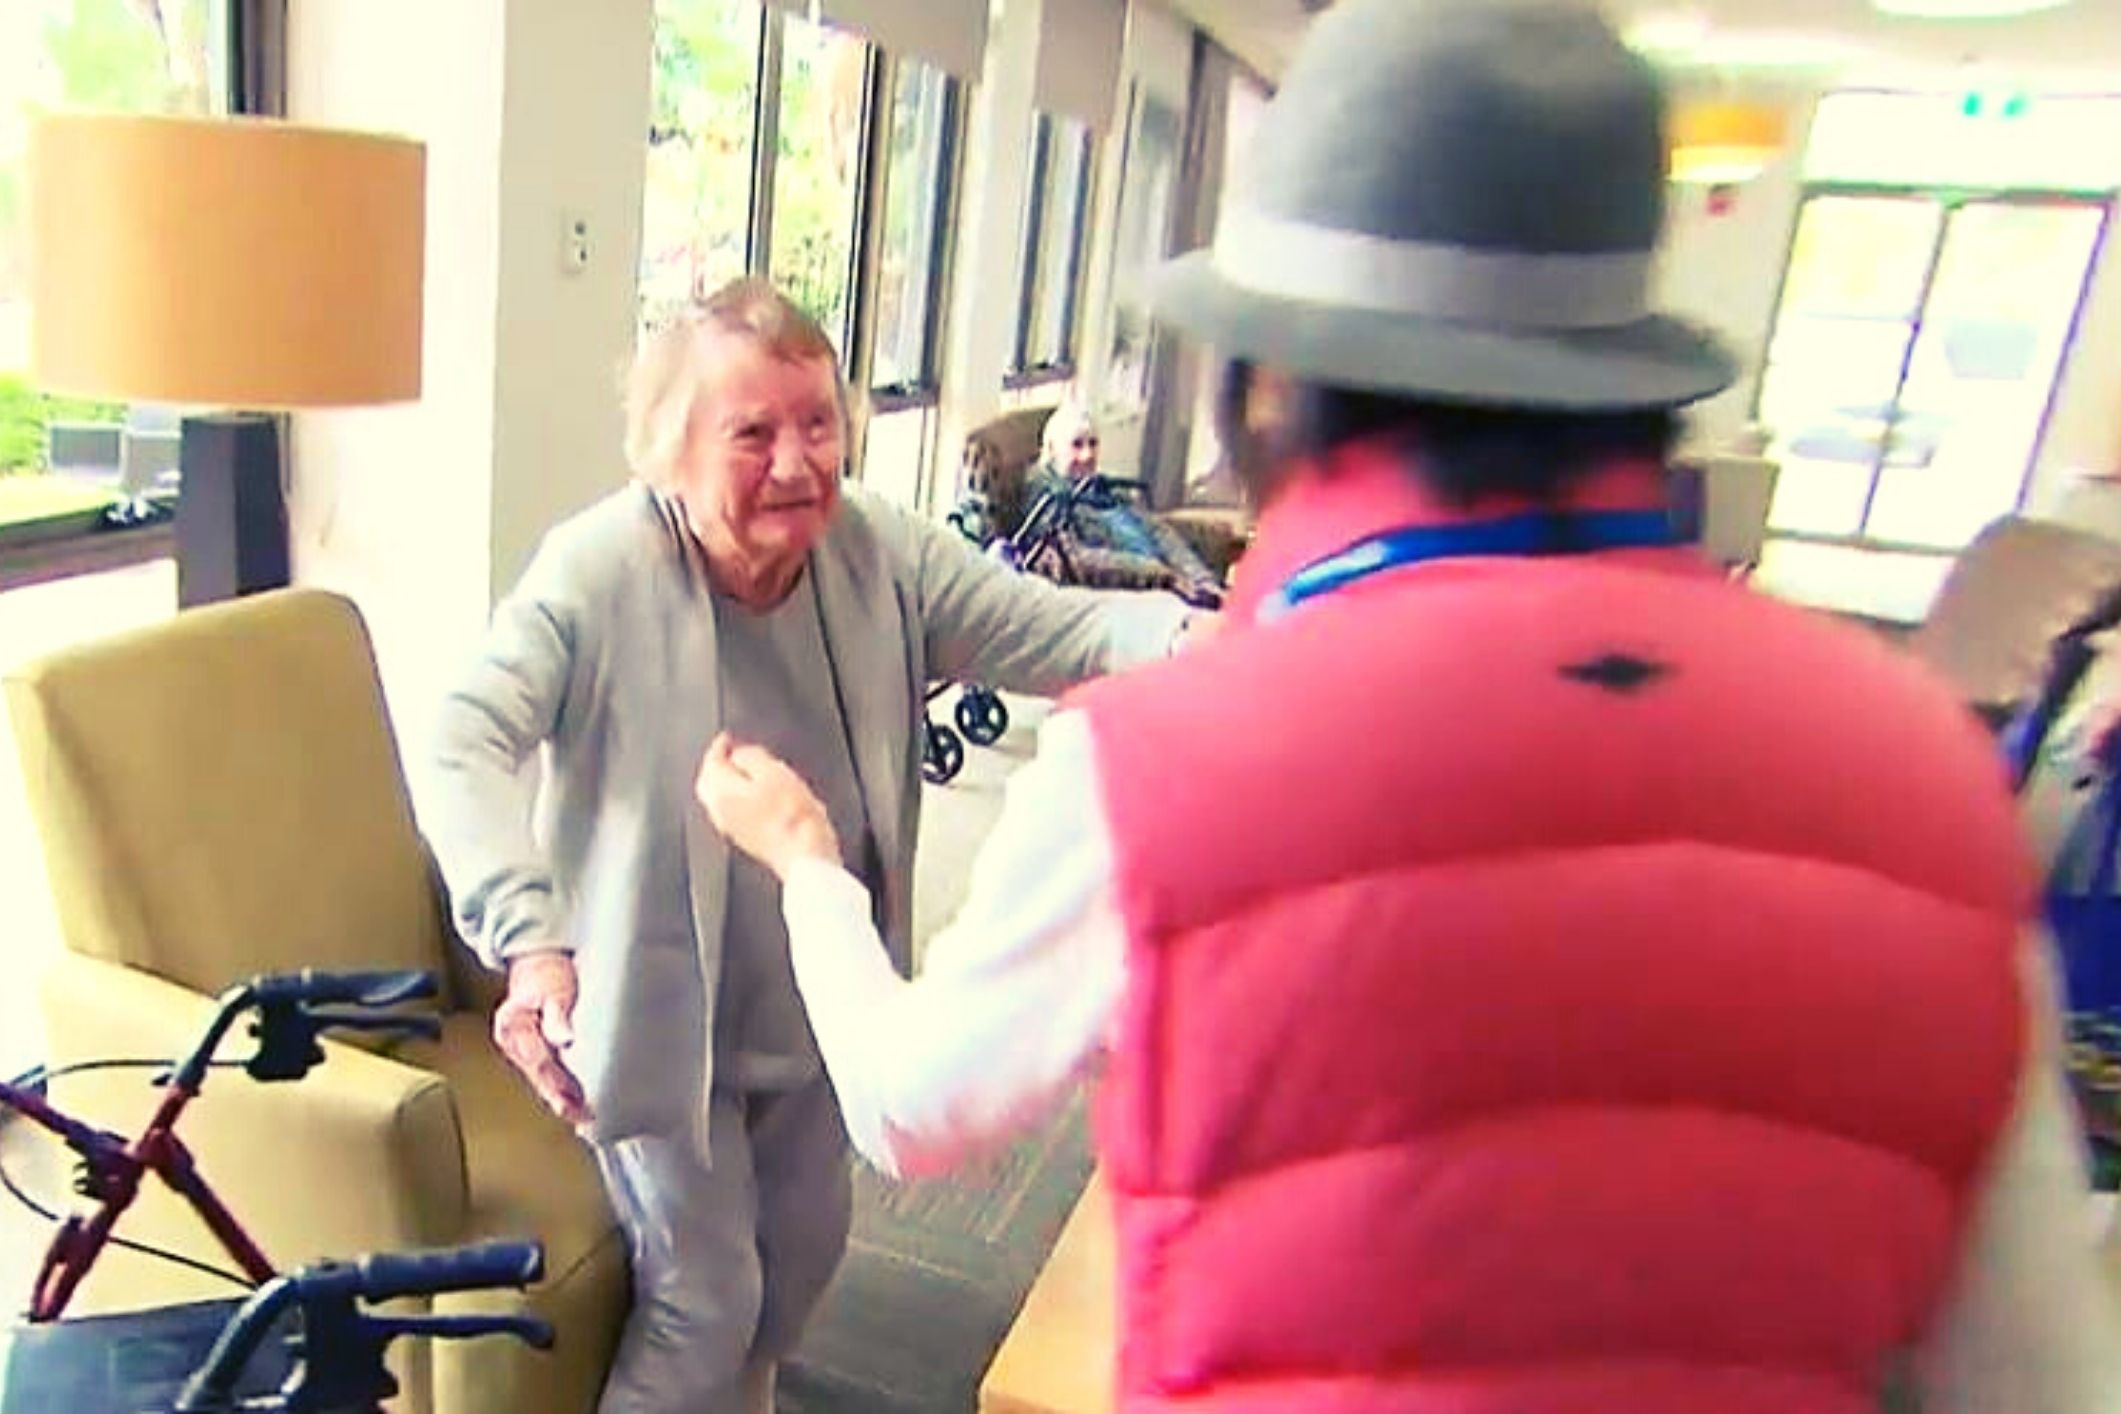 Tears flow as families launch surprise aged care visits on NSW ‘Freedom Day’